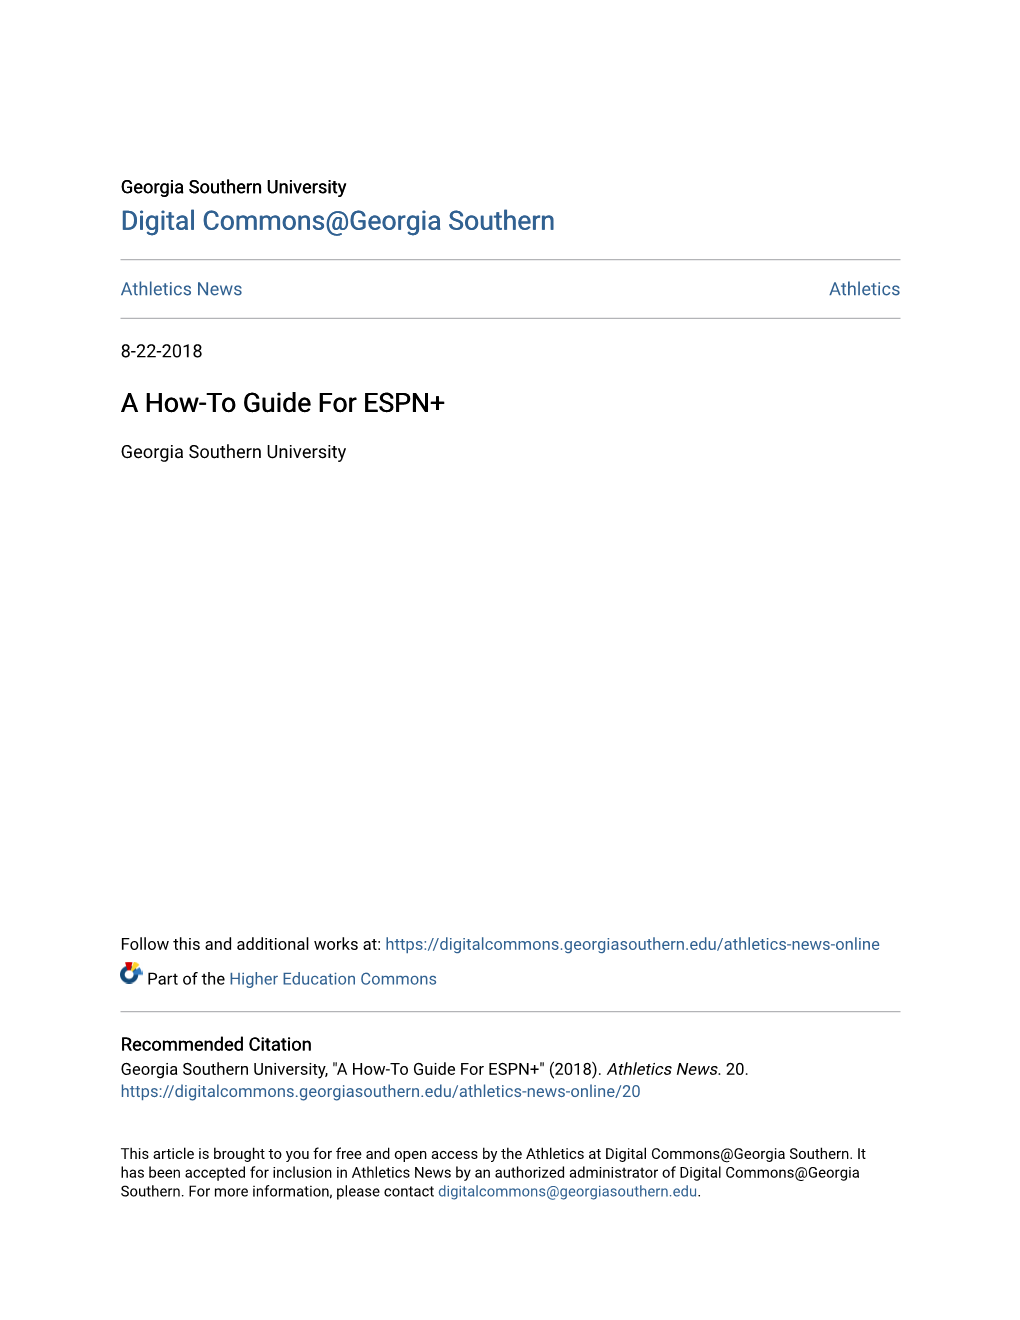 A How-To Guide for ESPN+